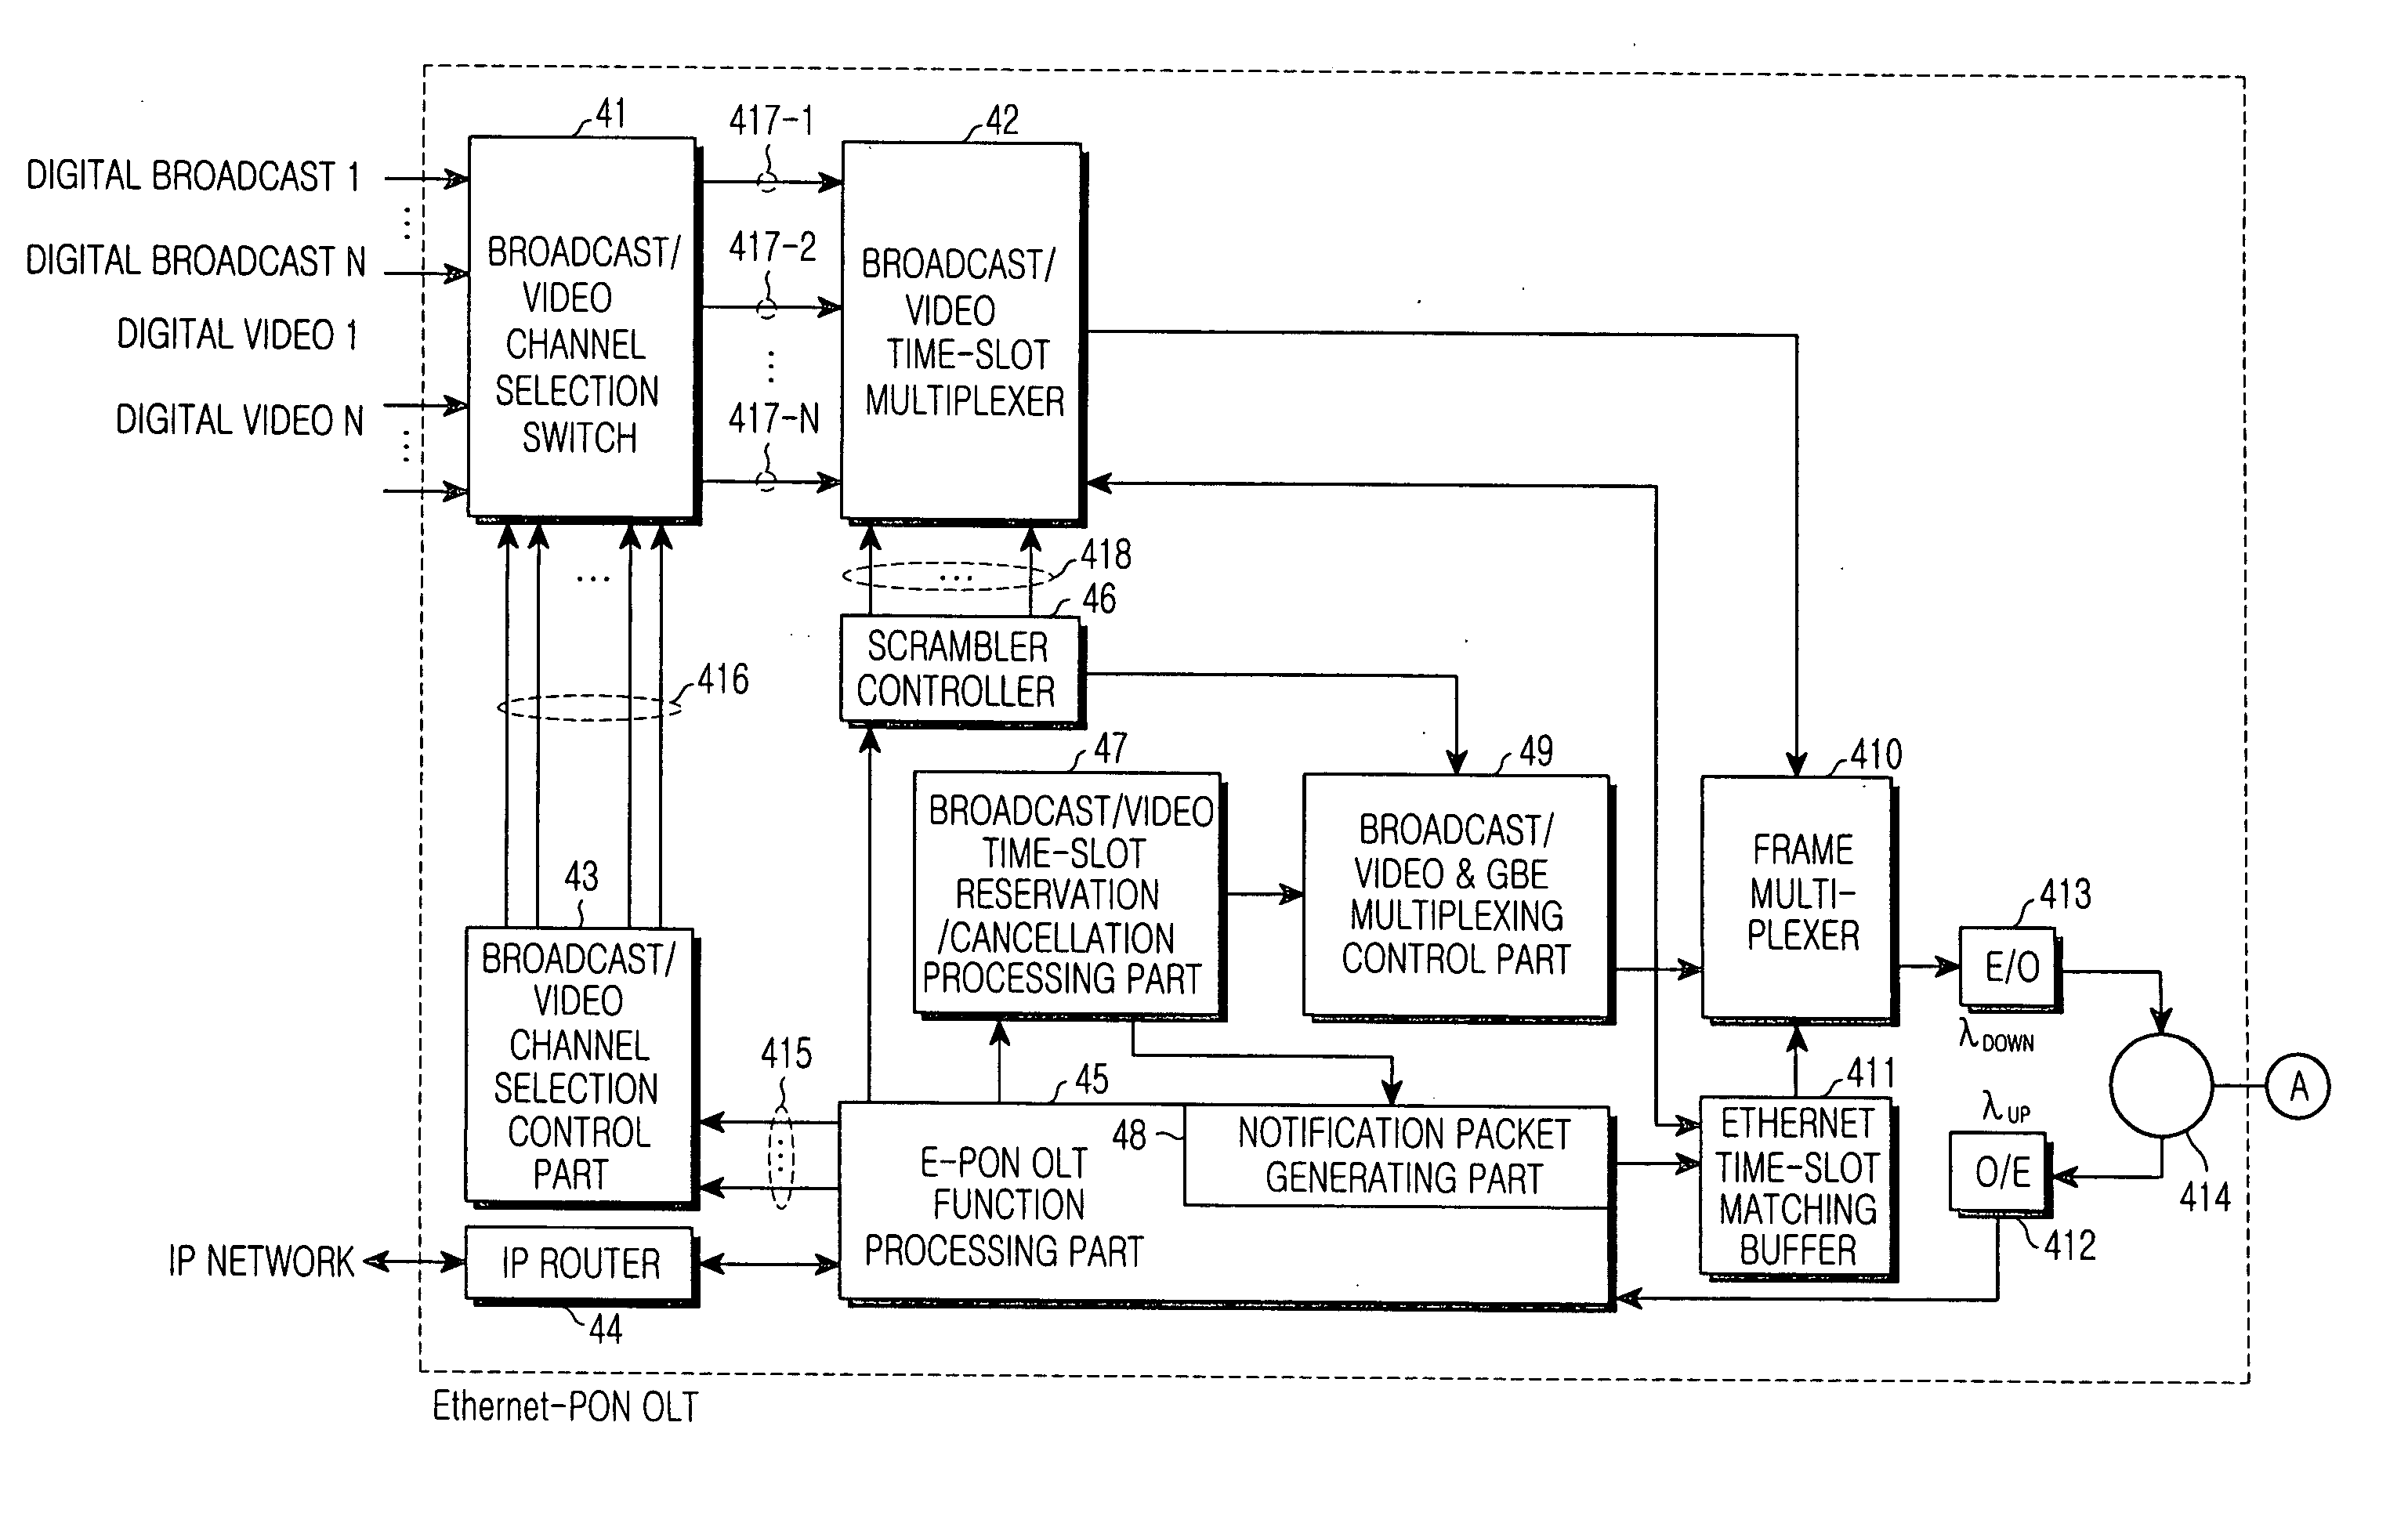 Ethernet PON using time division multiplexing to converge broadcasting/video with data